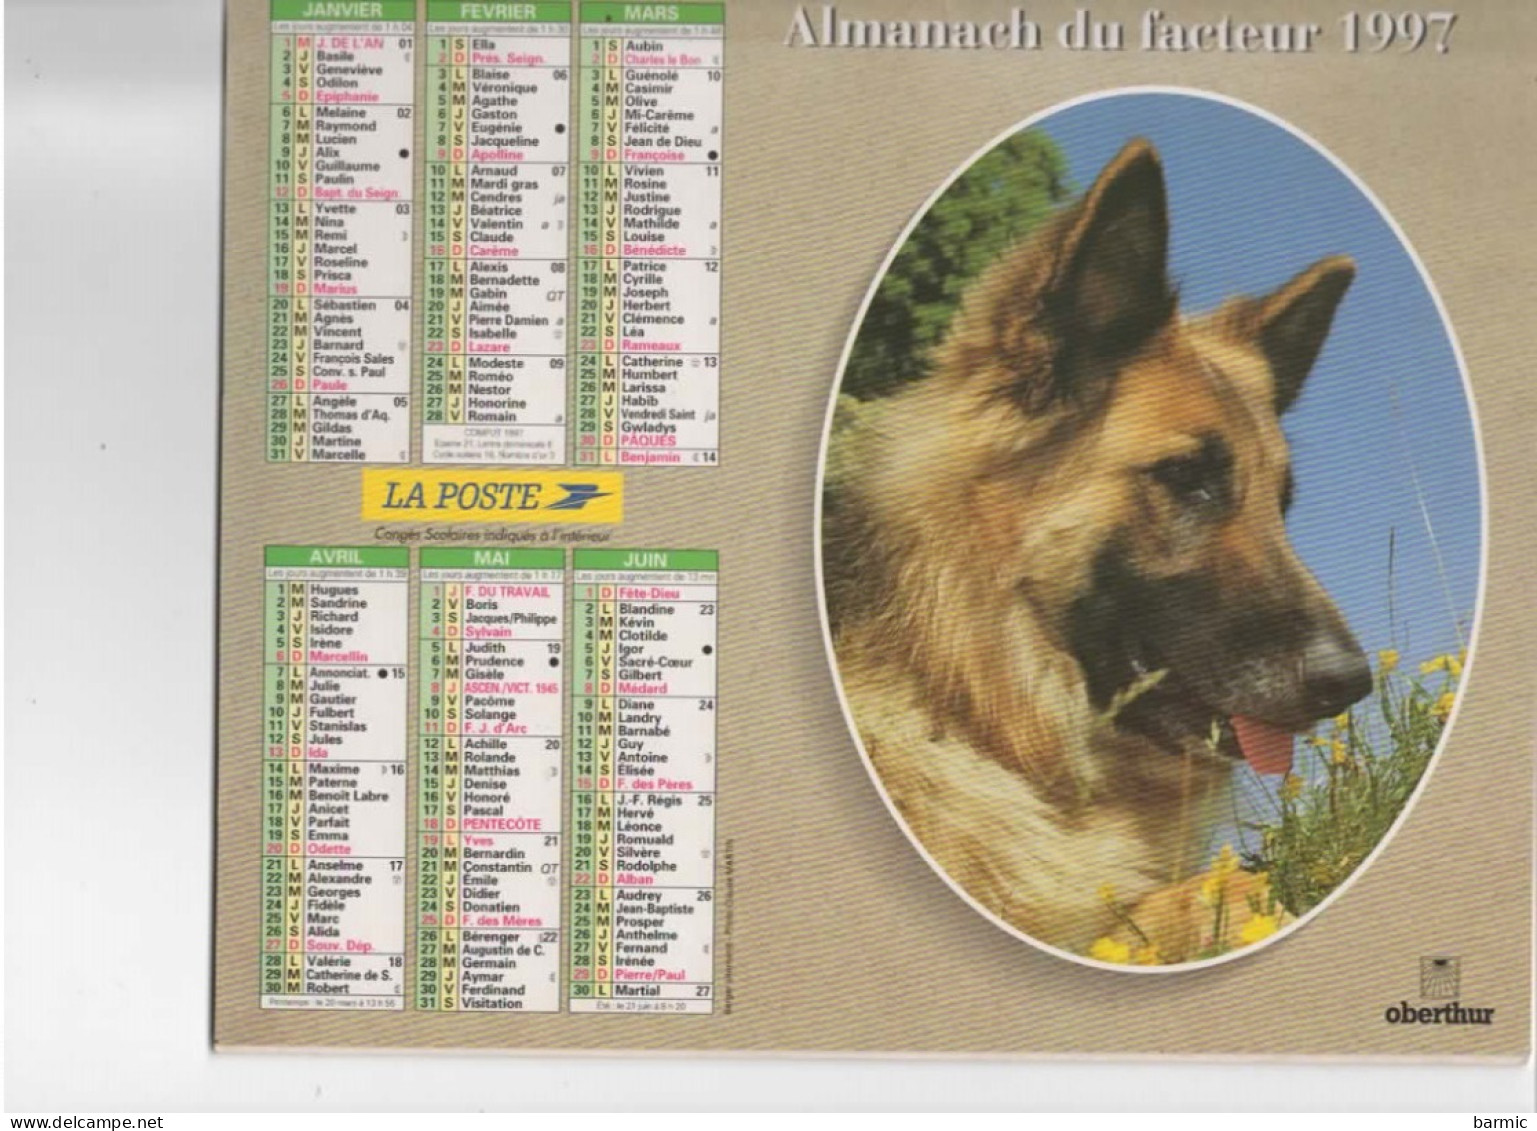 CALENDRIER ANNEE 1997, COMPLET, BERGER ALLEMAND, CHEVAL REF 13765 - Big : 1991-00